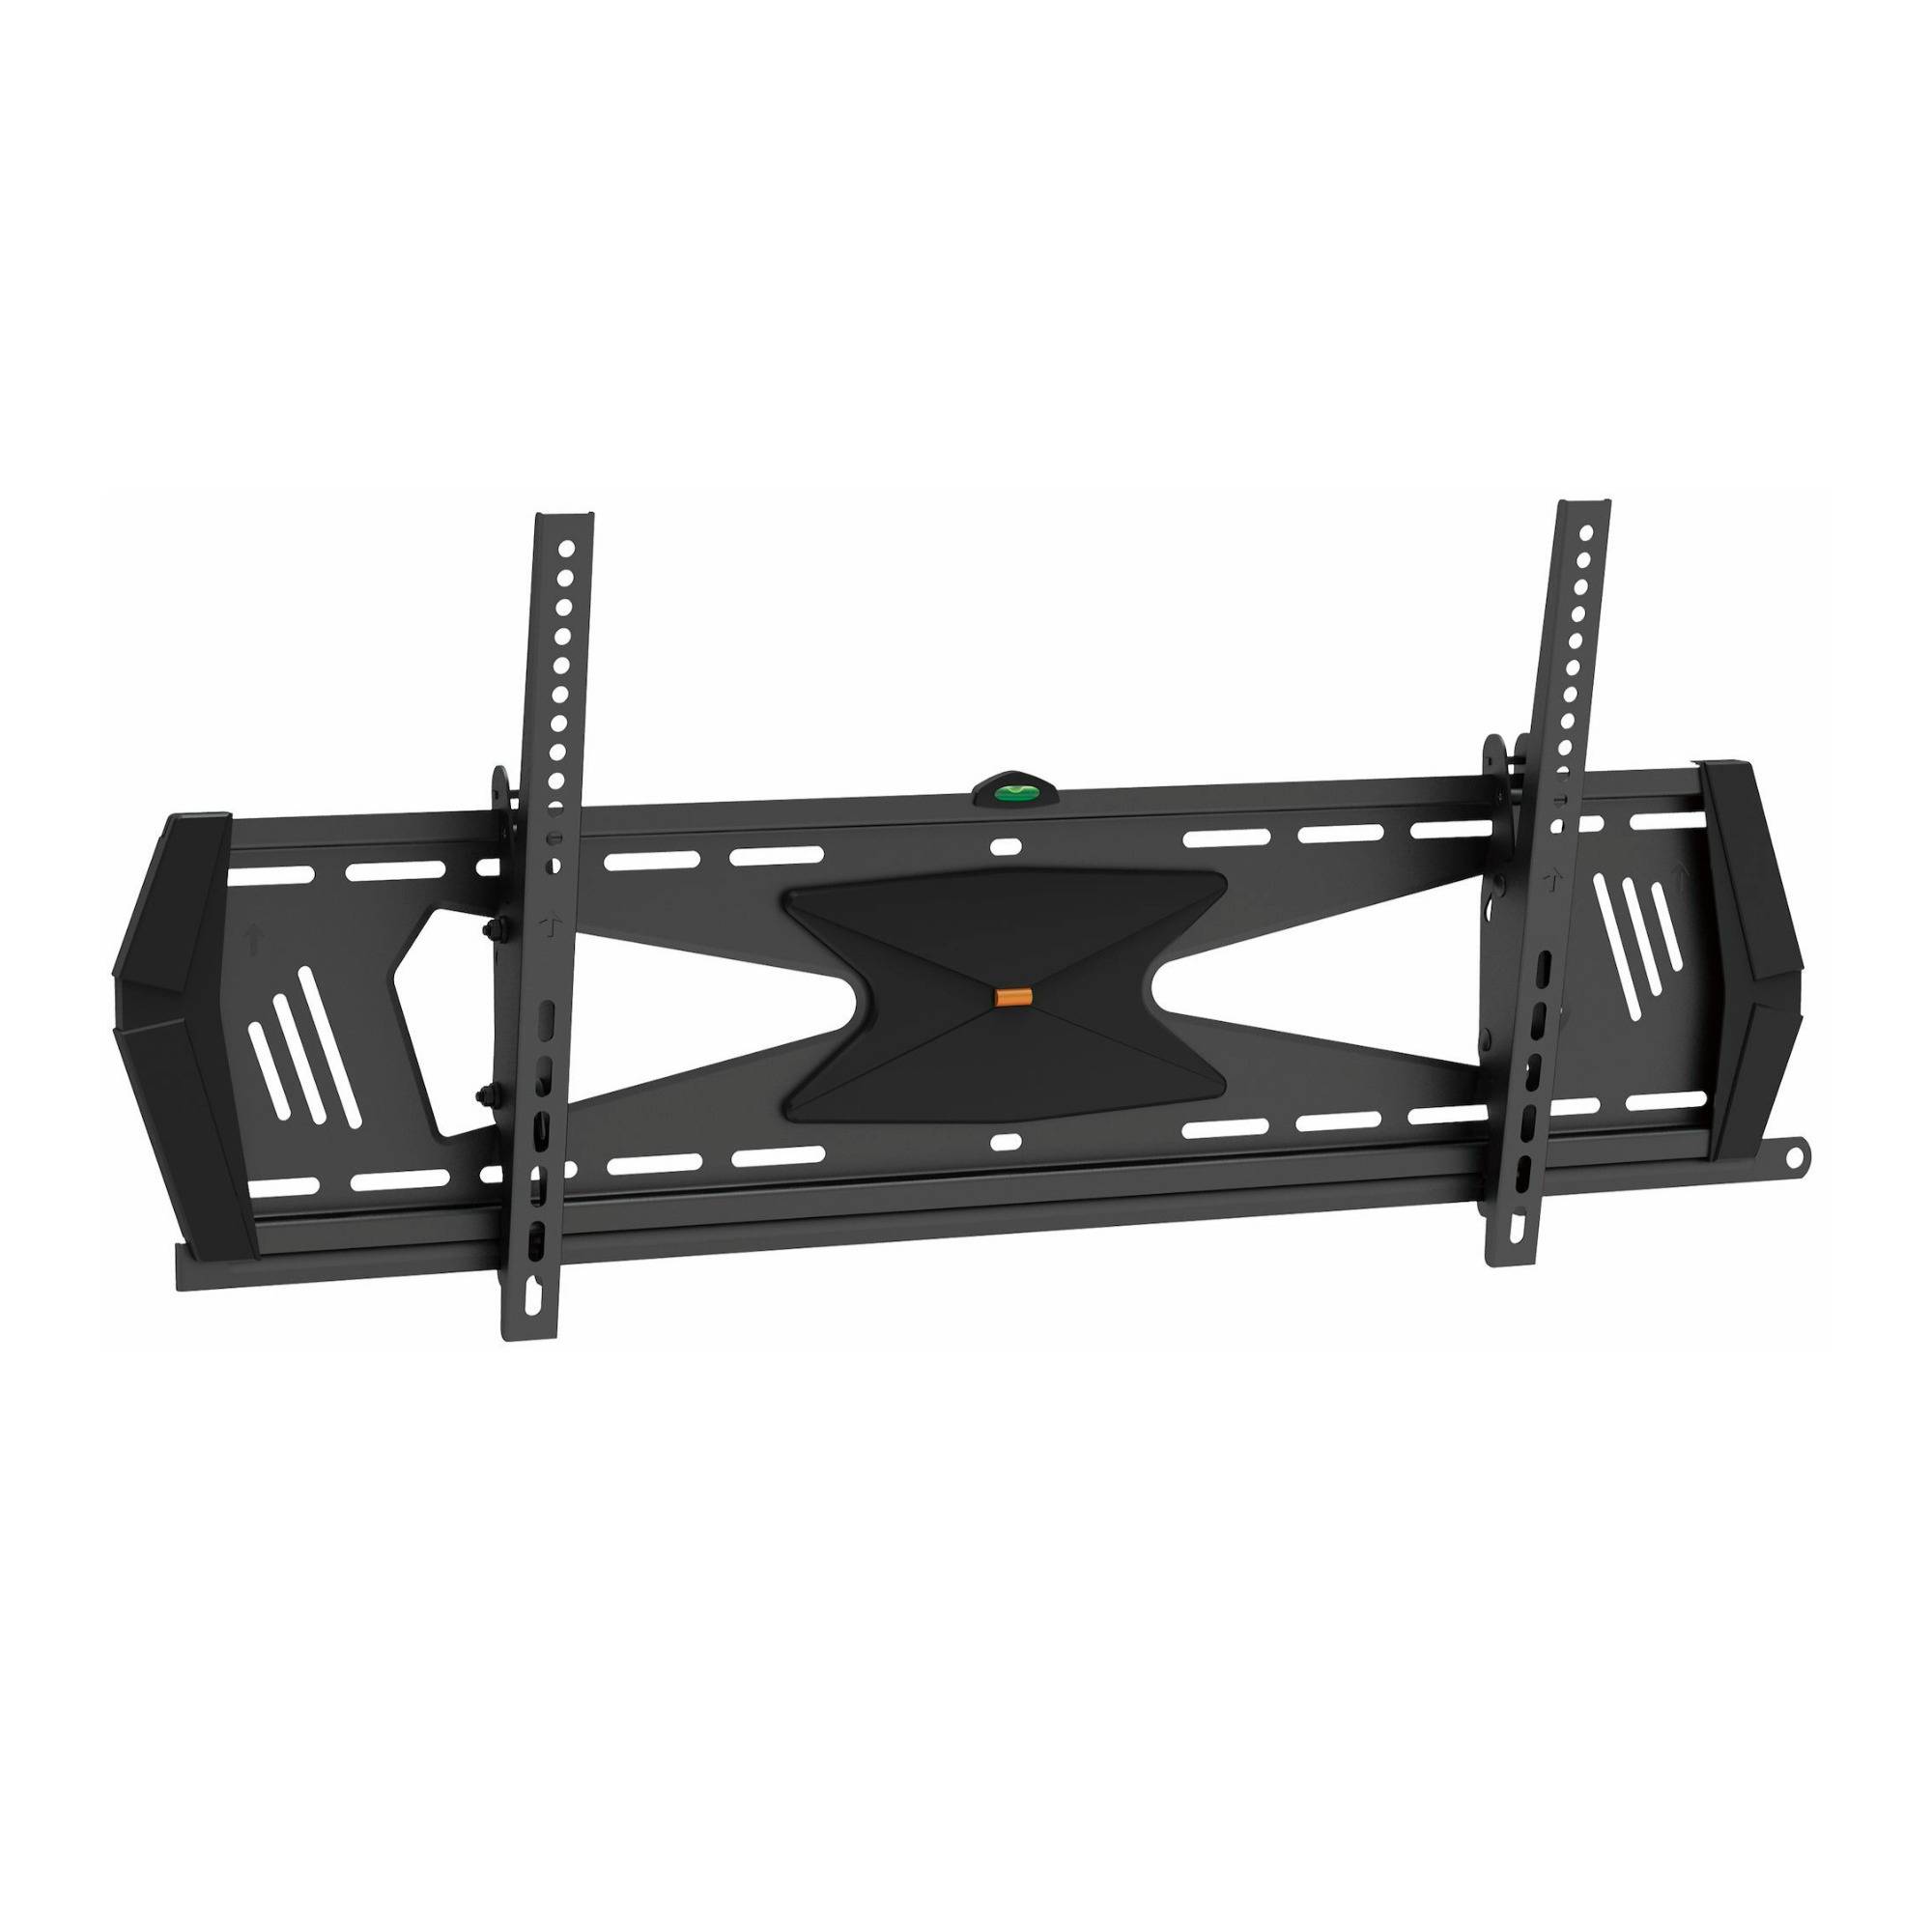 StarTech Low-Profile Tilting TV Wall Mount Bracket for 37 to 75-Inch Displays